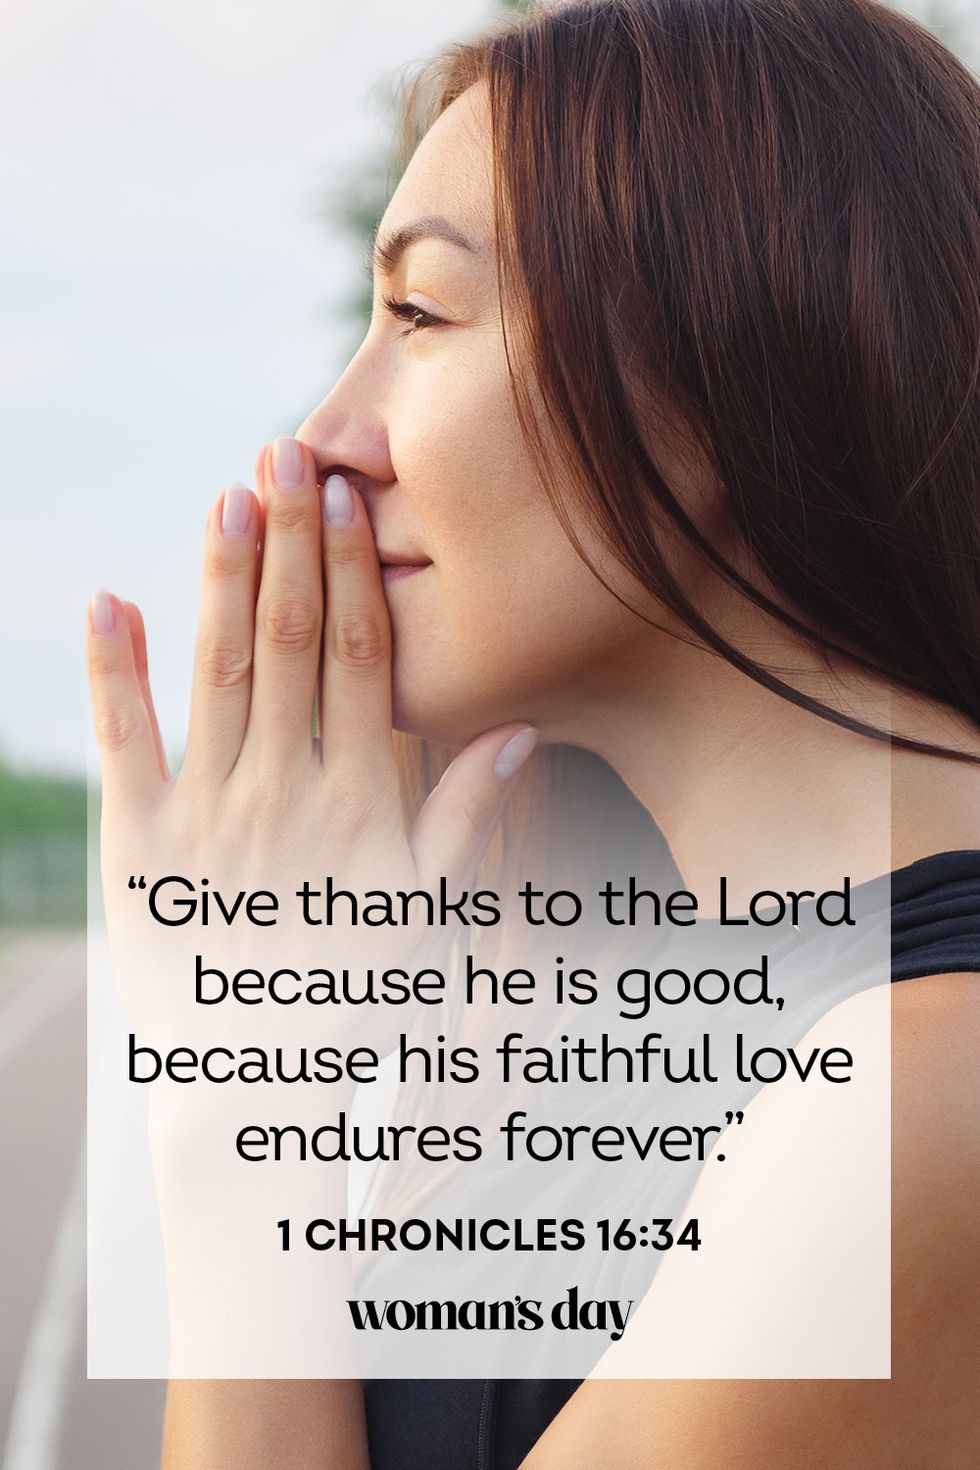 💞💒The True Love of God — Praise the Lord — English Christian